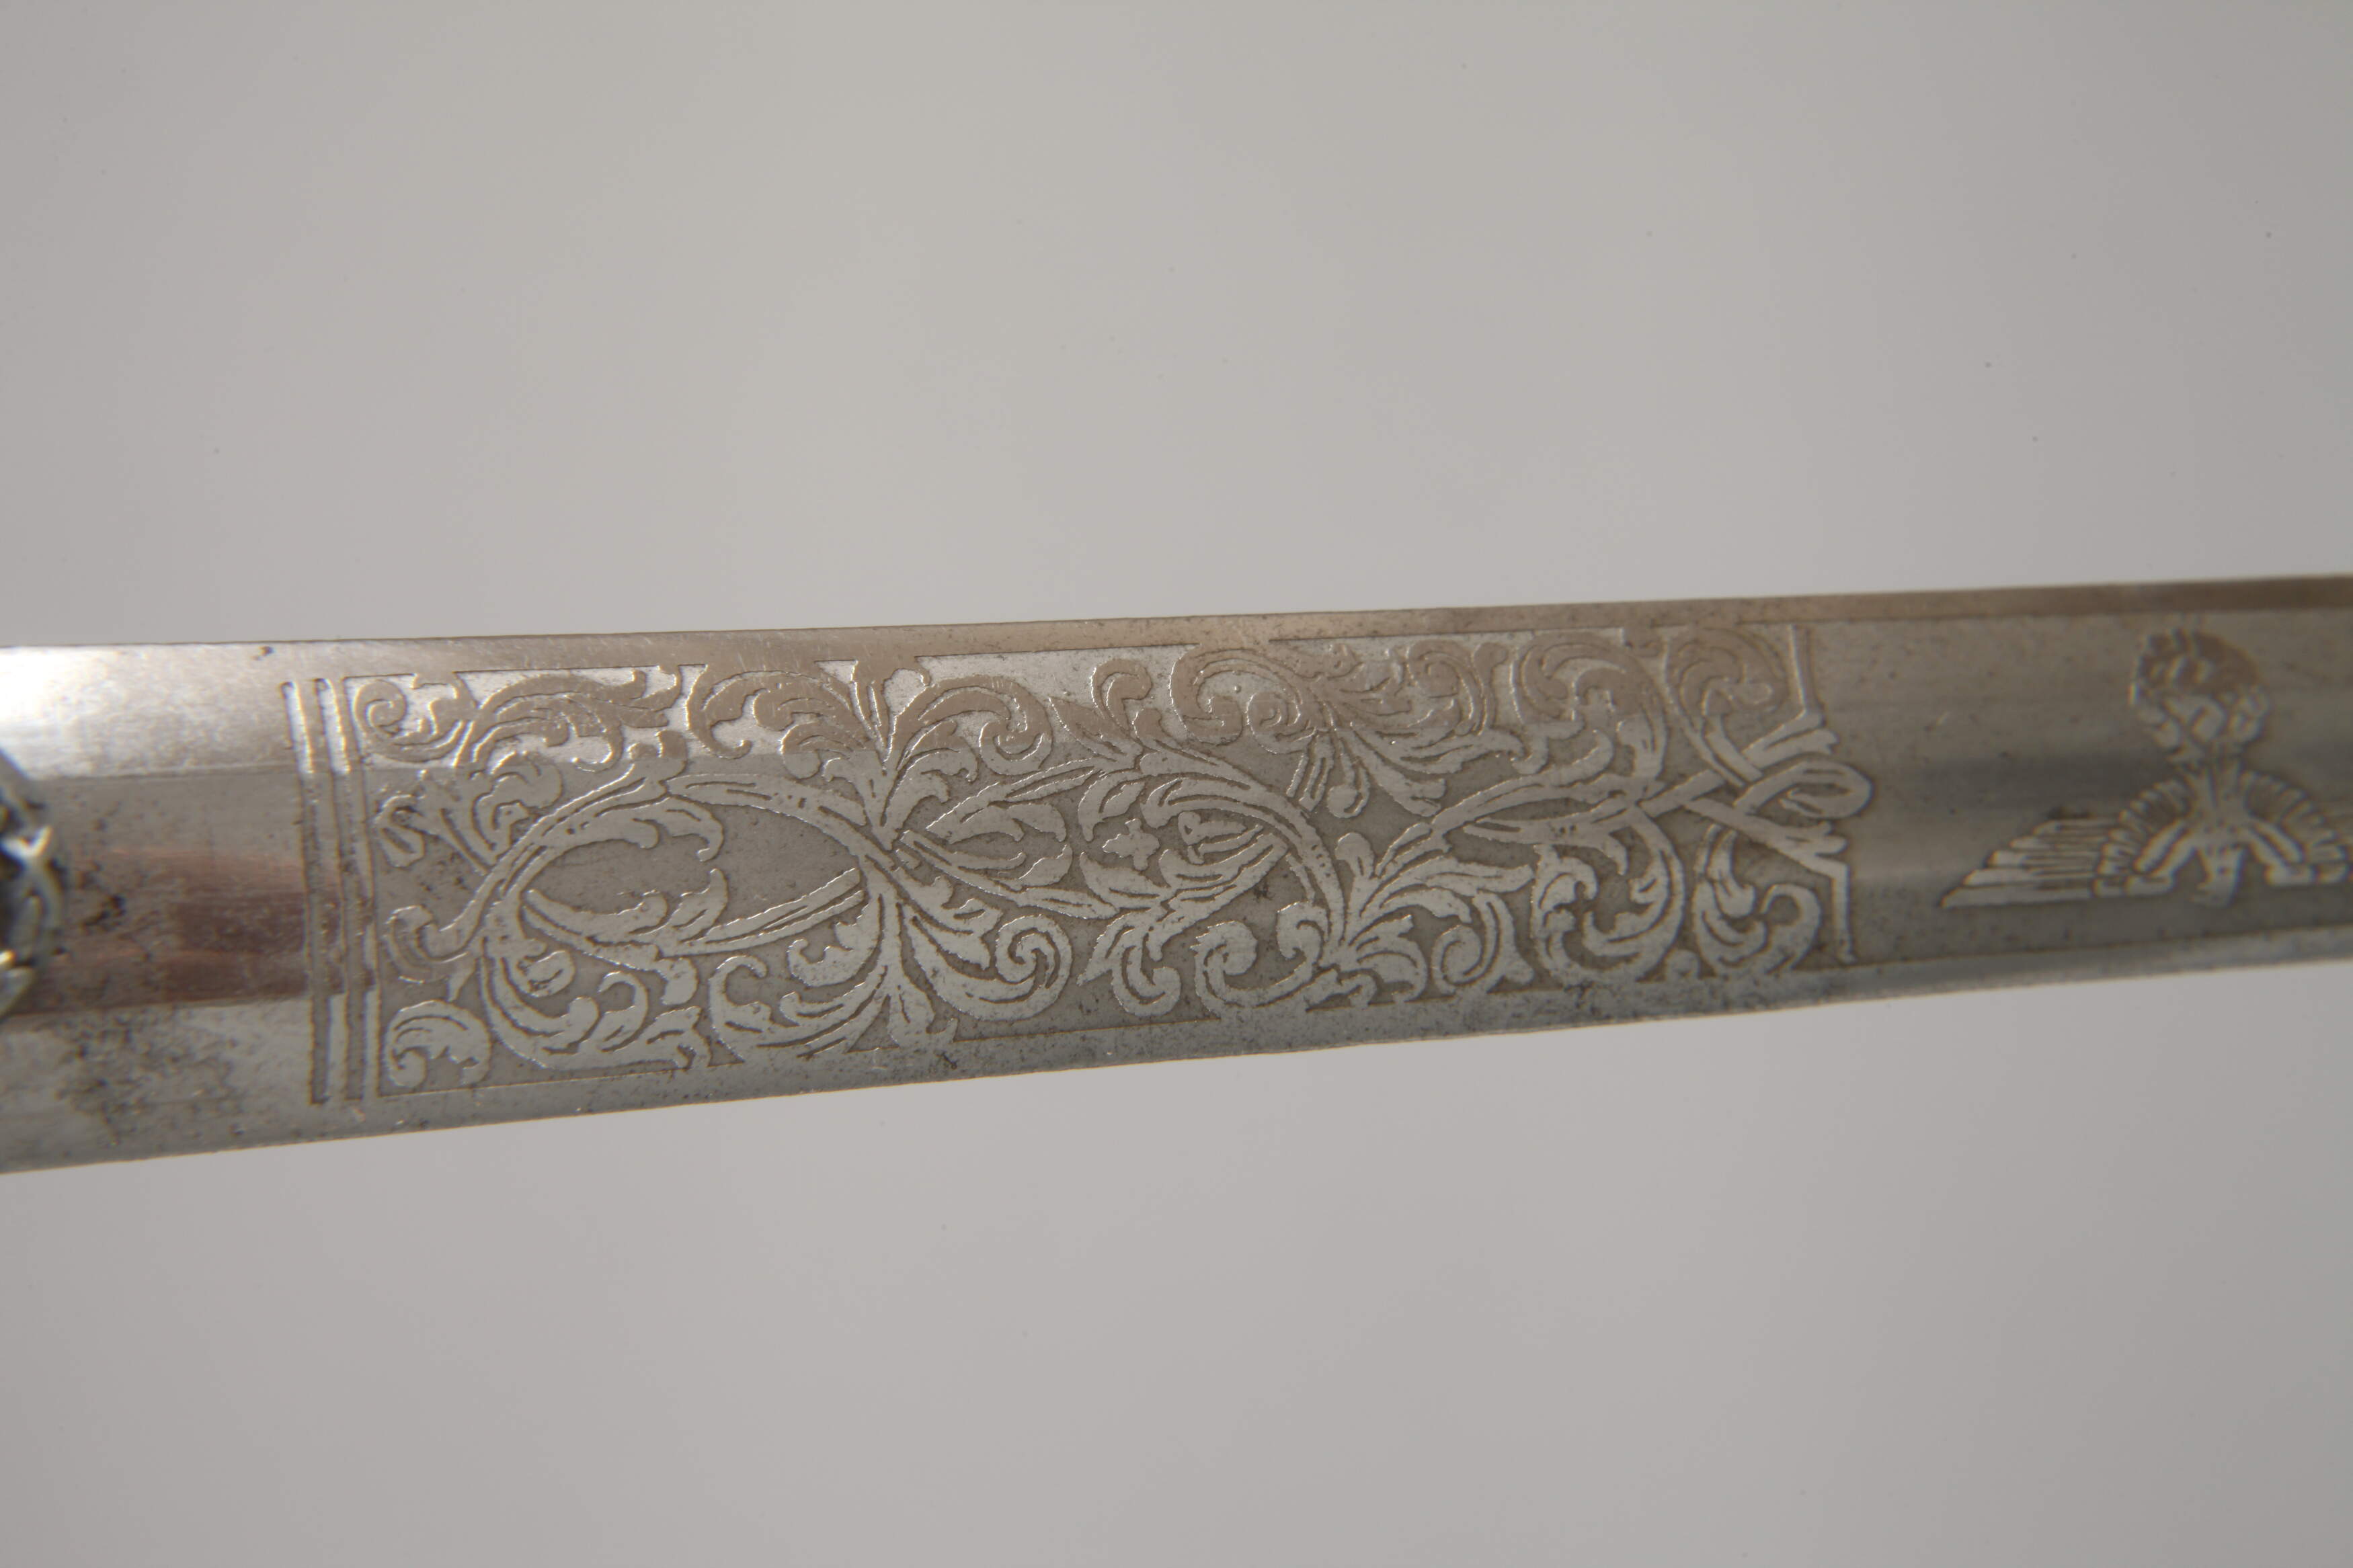 Army dagger with etched blade - Image 5 of 5